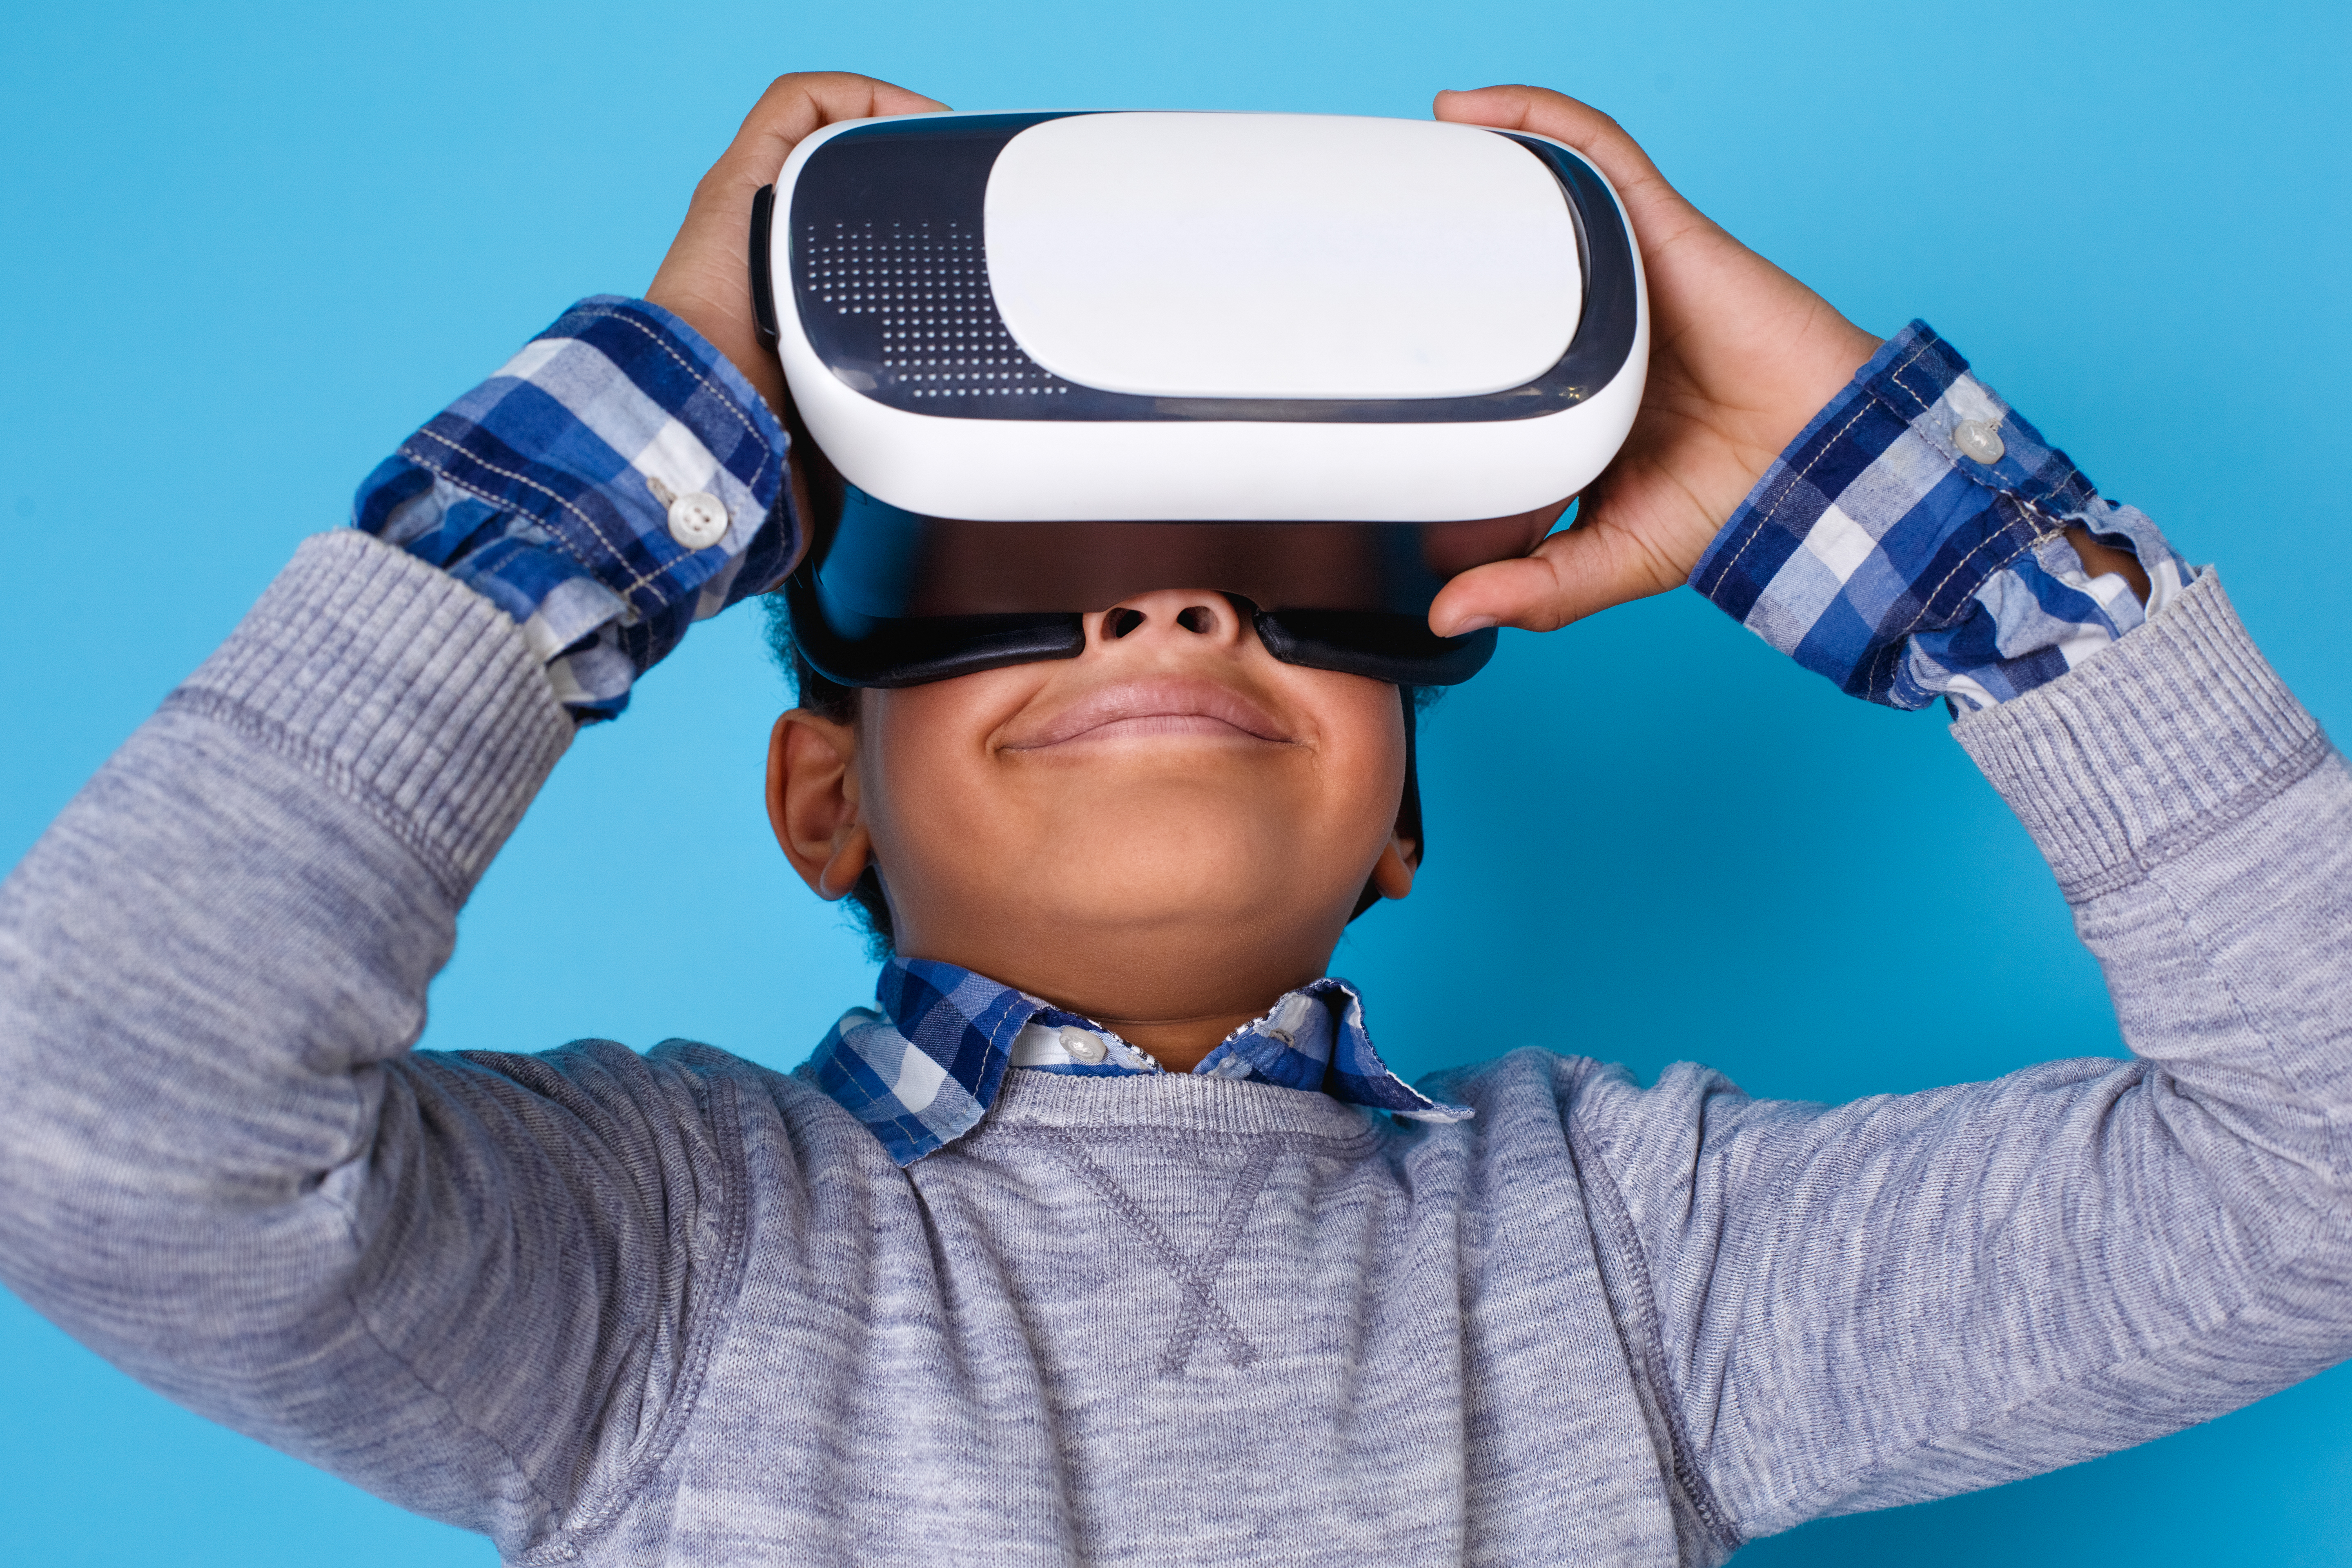 Young boy smiling with virtual reality goggles on.